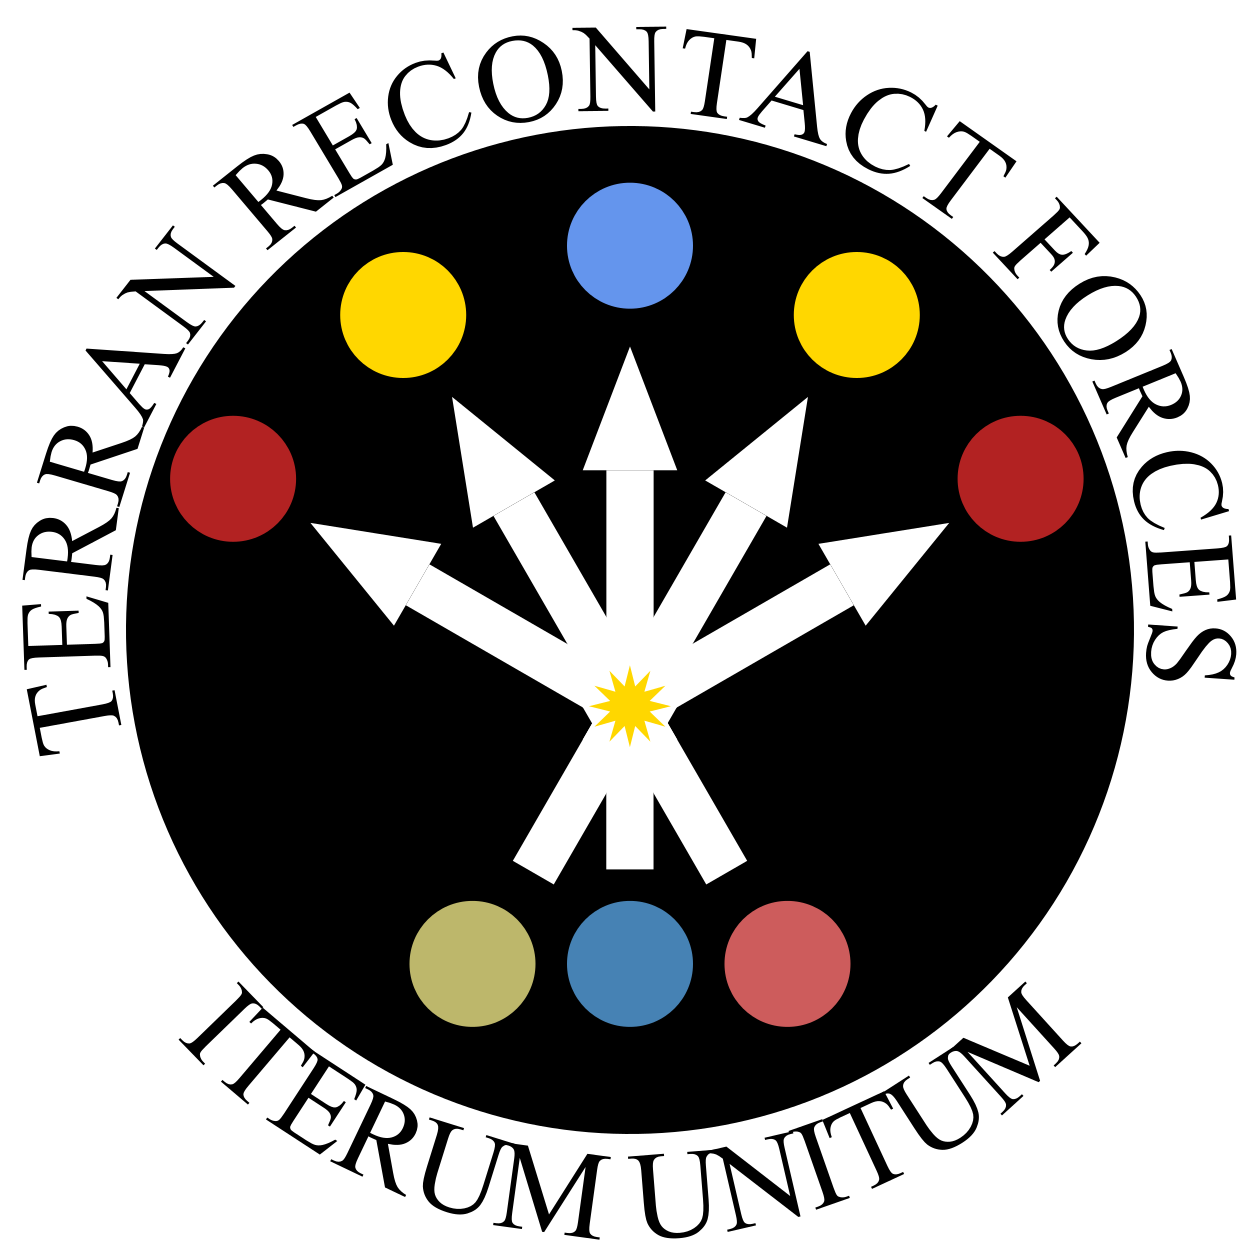 a white circular emblem, with a smaller black circle in the center. text is curved around above and below the black circle to fit to the arc of the circle. the text at the top reads TERRAN RECONTACT FORCES, while the text at the bottom reads ITERUM UNITUM (unite again). the image on the emblem is of 3 planets (darkyellow teal salmon) at bottom, with 3 arrows converging and then diverging into 5 arrows (there is also a 12-pointed yellow star at the convergence of all the arrows). the arrows point to, in pairs from the bottom- 2 red stars, 2 yellow stars, and 1 blue star.